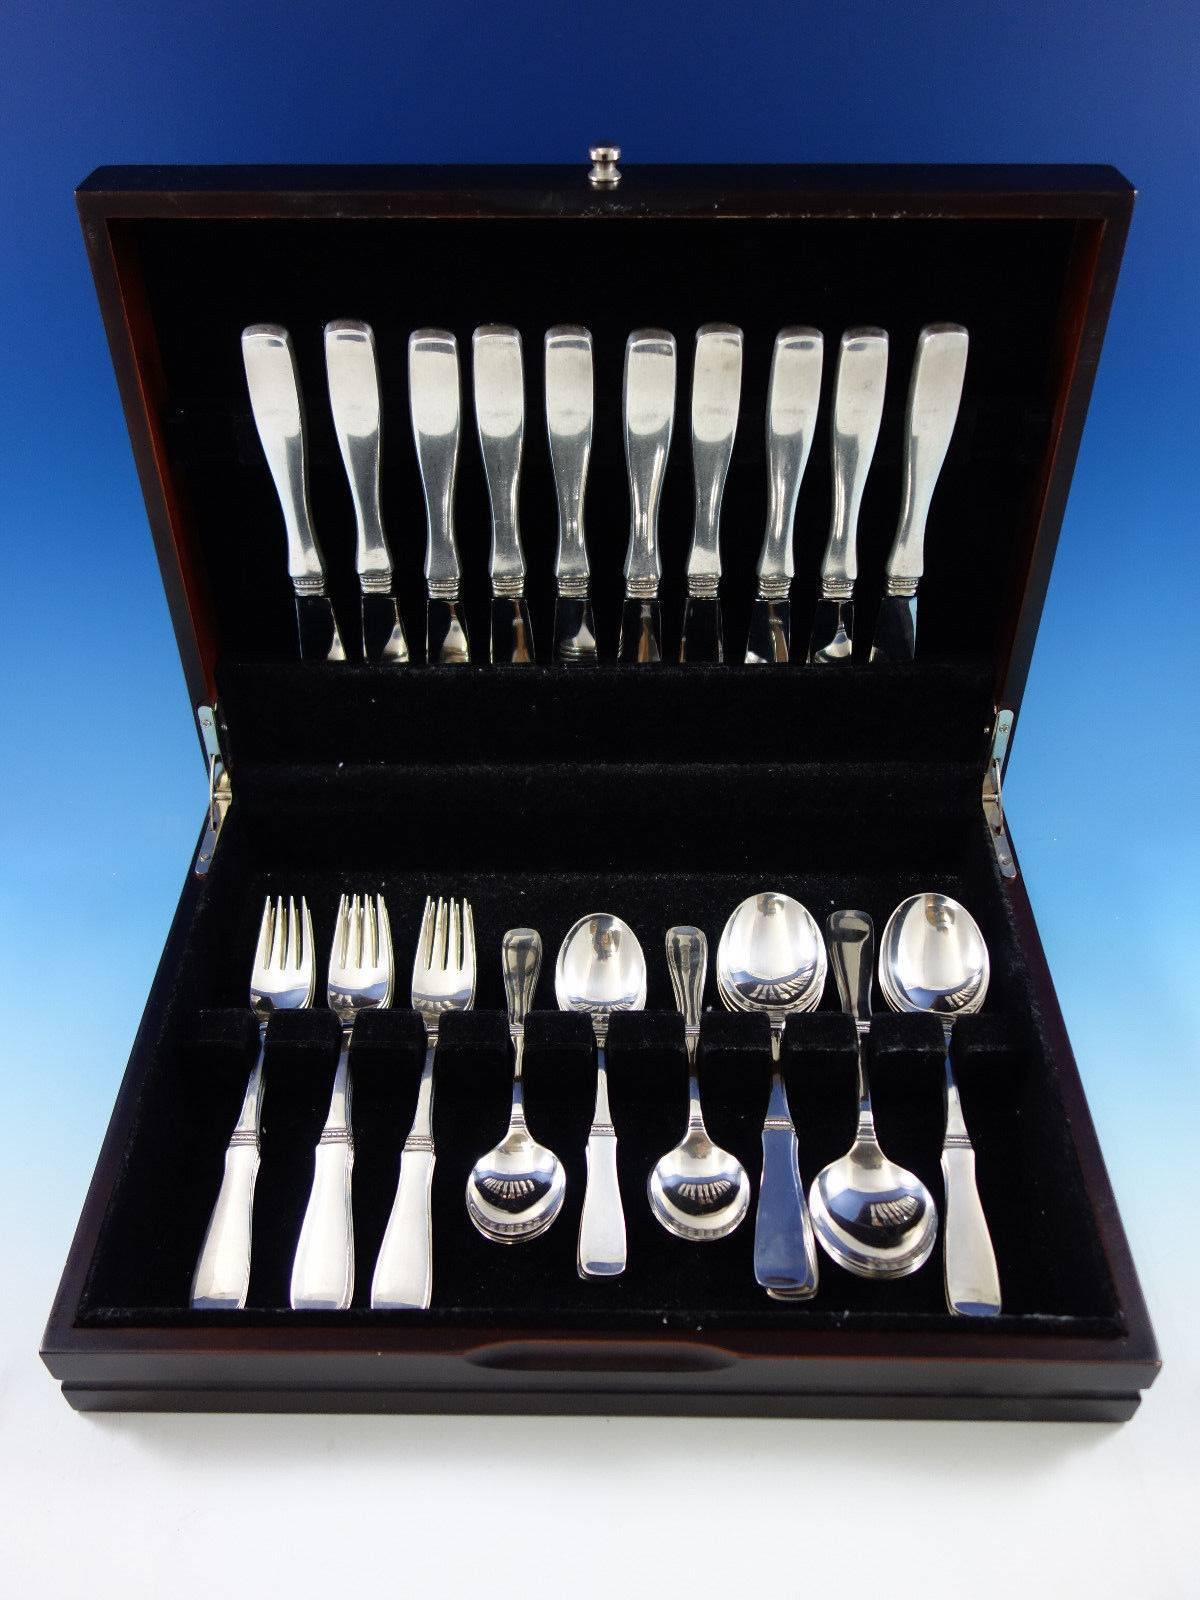 Scandinavian Modern Swedish silver flatware set by Markstroms Guldsmeds, with 1961 date mark - 40 pieces. This set includes: 

Ten knives, 8 5/8